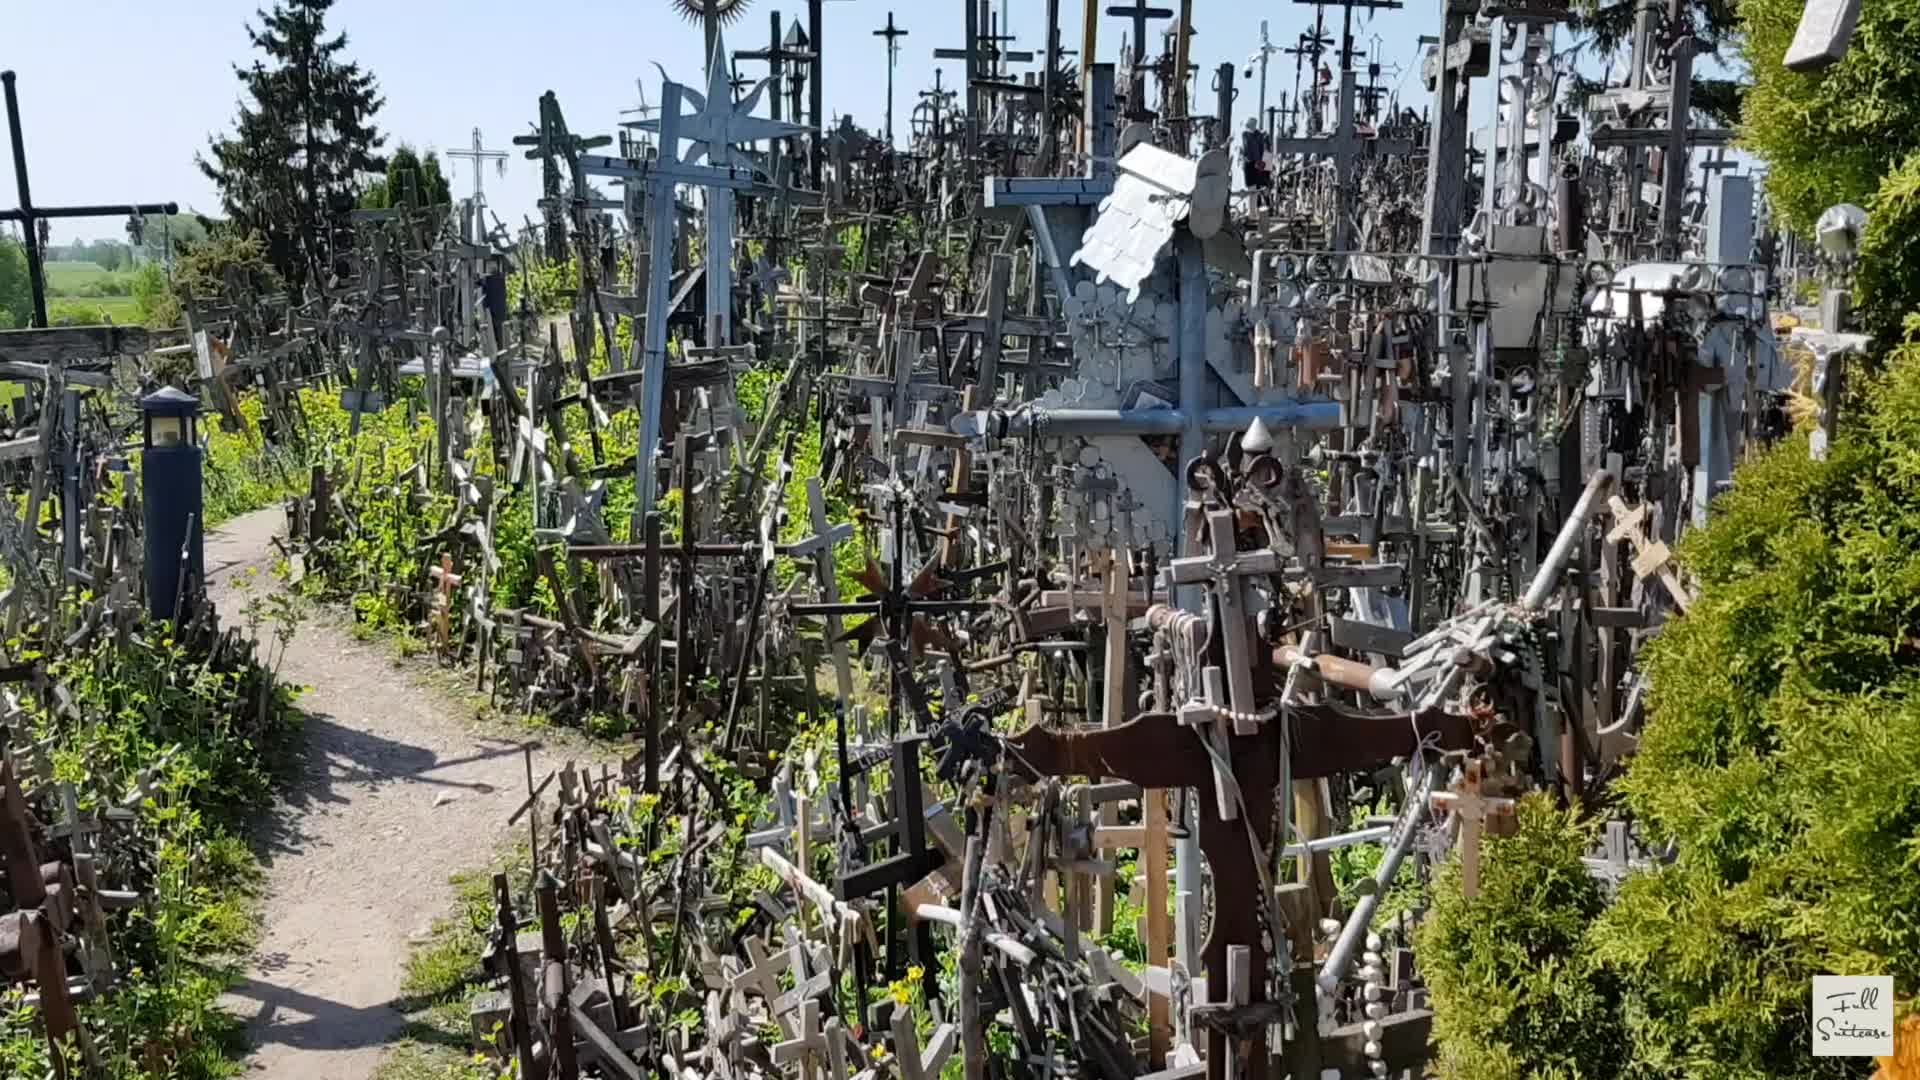 Visit the Hill of Crosses in Lithuania